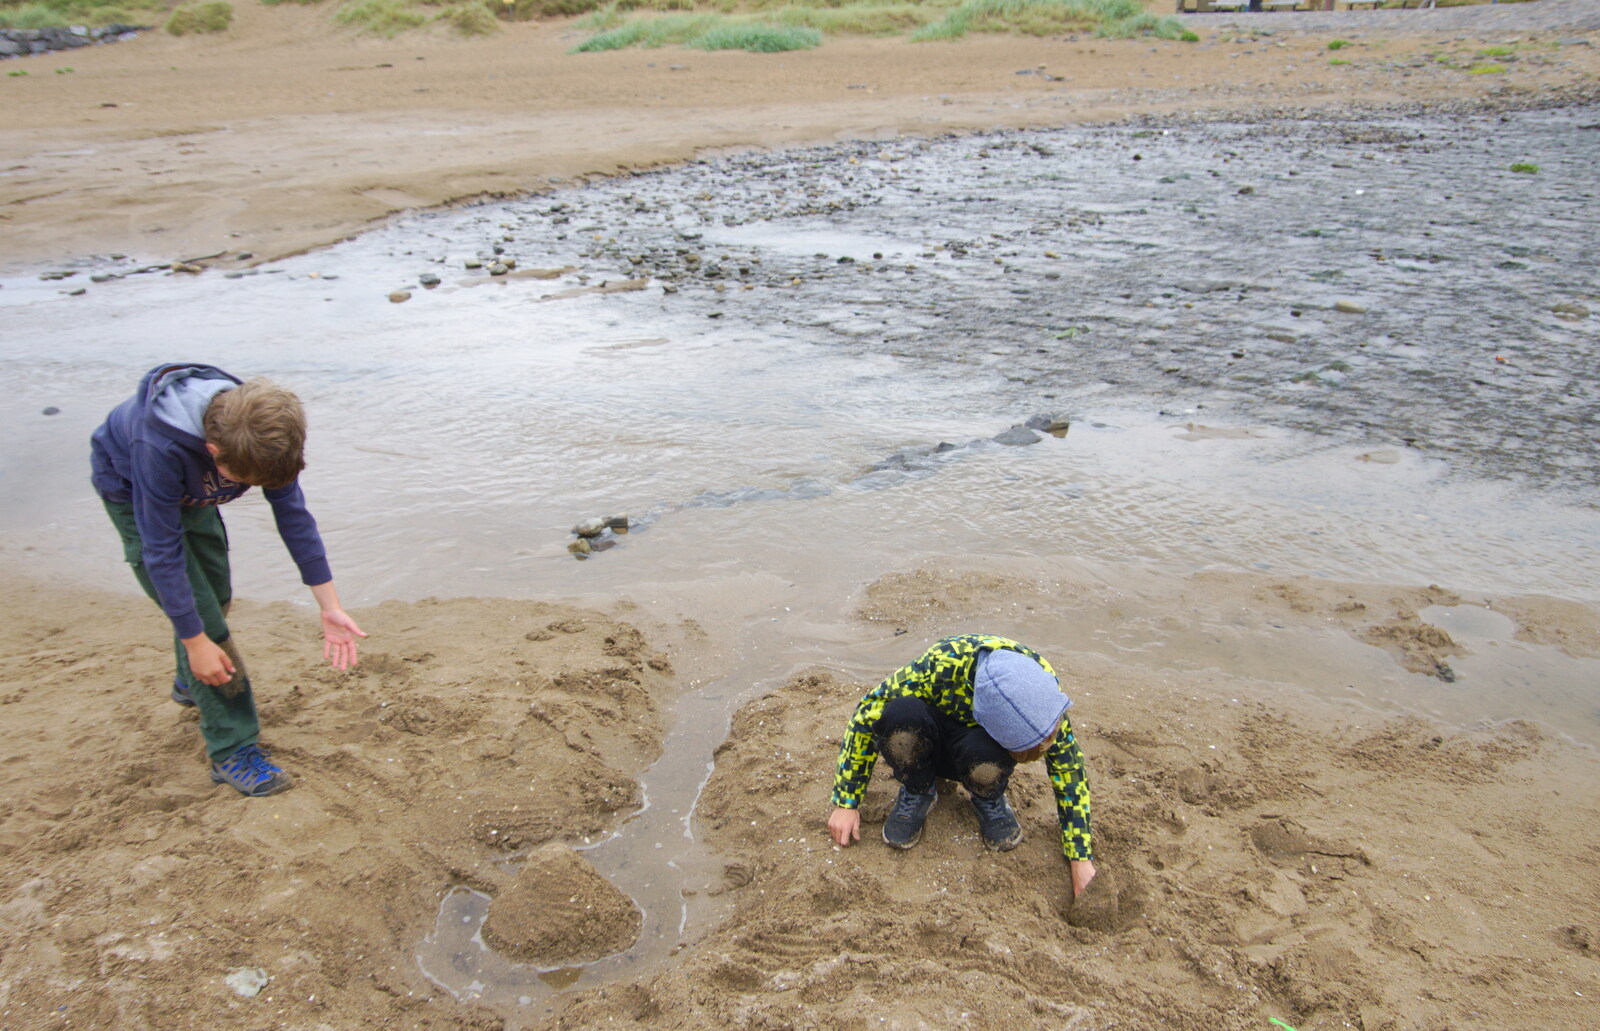 The boys dig around in the sand from A Day in Derry, County Londonderry, Northern Ireland - 15th August 2019